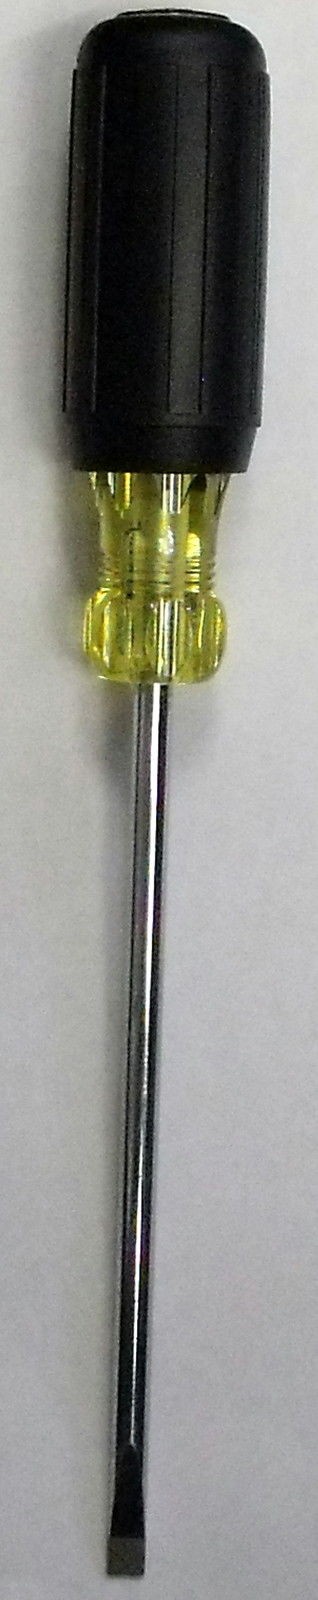 Ideal 35-151 Electrician's Cabinet Tip Screwdriver 1/4" x 6"